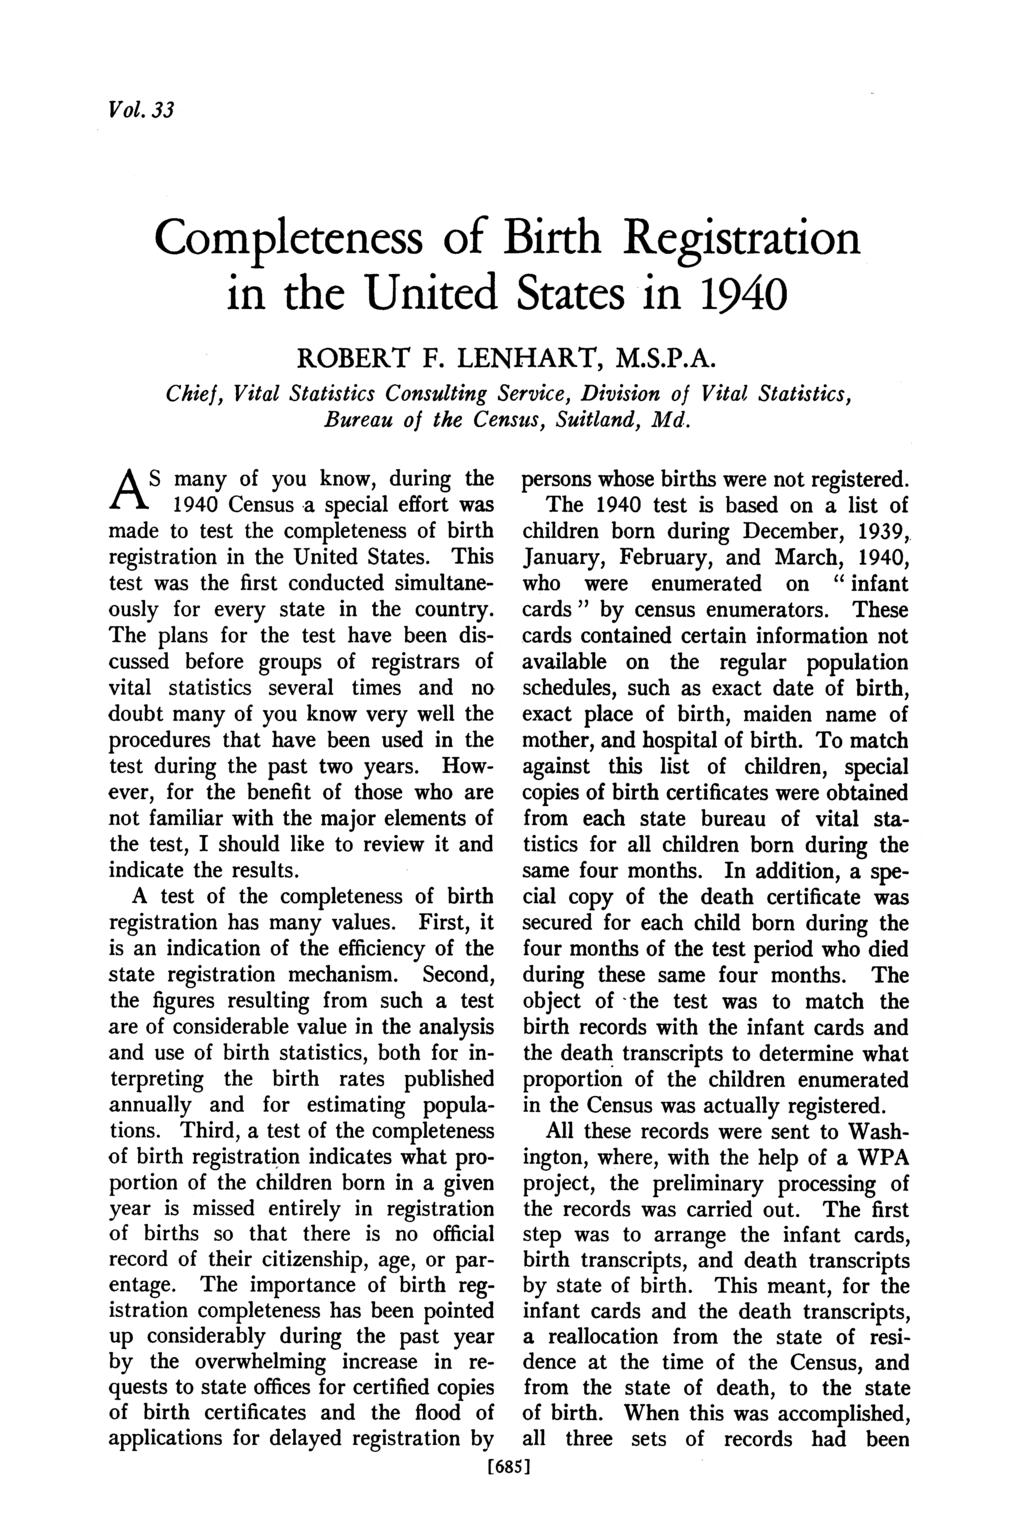 Vol. 33 A,S Completeness of Birth Registration in the United States in 1940 ROBERT F. LENHART, M.S.P.A. Chief, Vital Statistics Consulting Service, Division of Vital Statistics, Bureau of the Census, Suitland, Md.